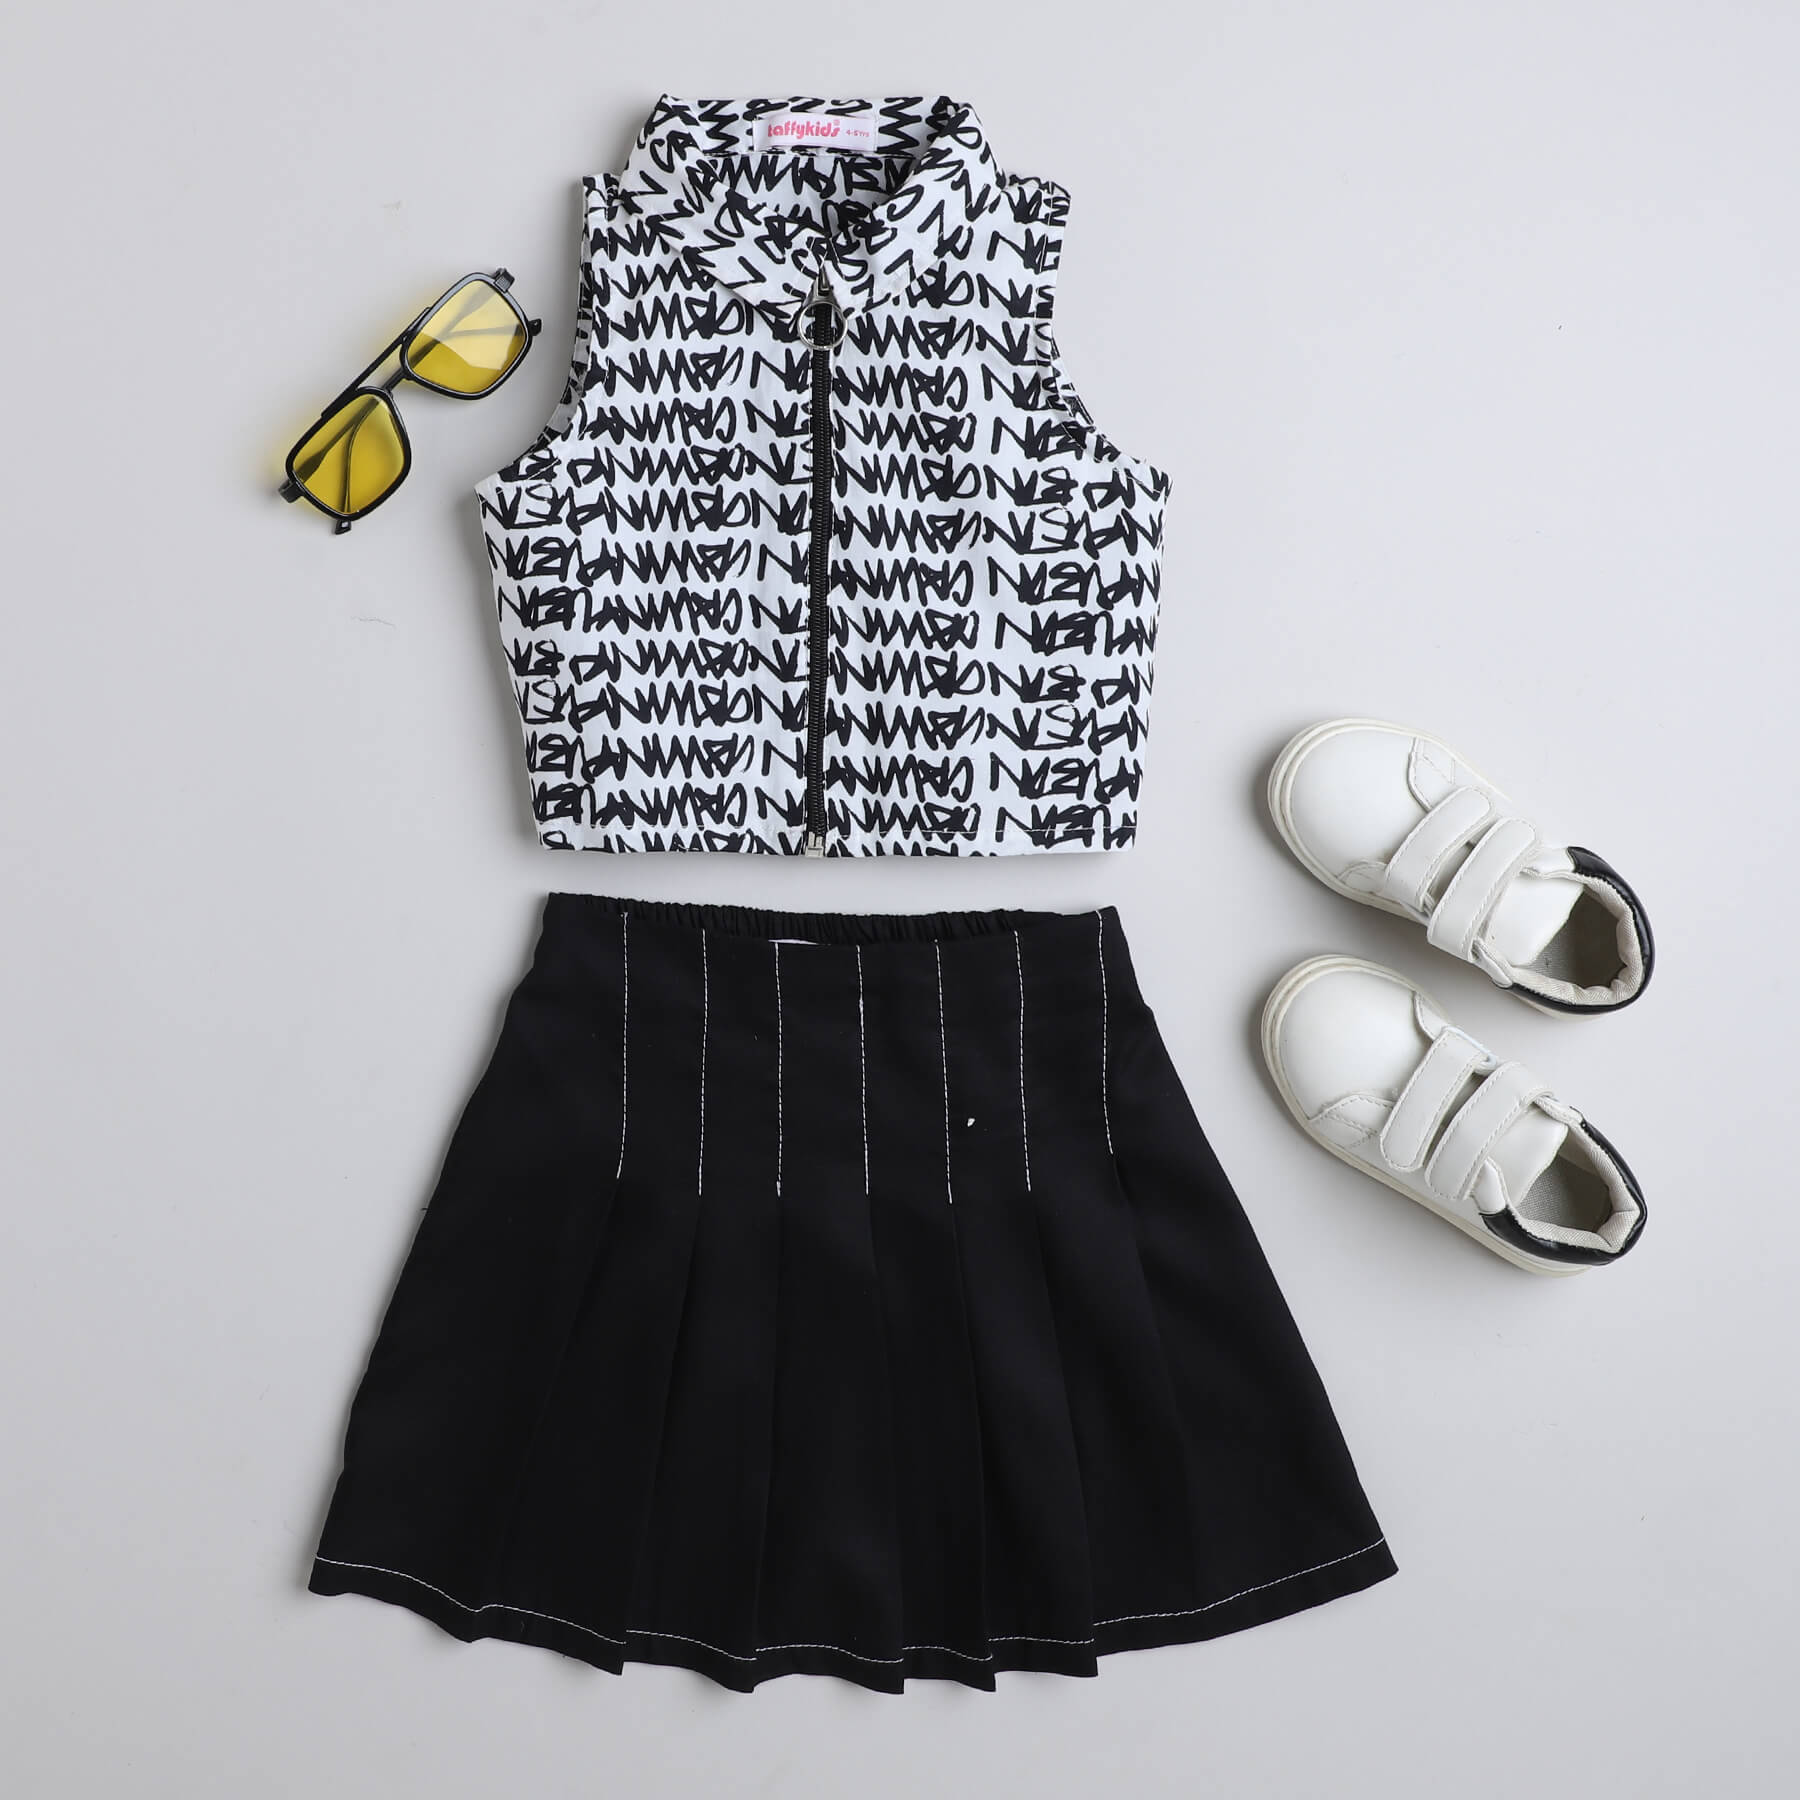 Taffykids 100% viscose Typographic printed sleeveless  collared zip up crop top and solid stitch detail pleated skirt set-Black/White